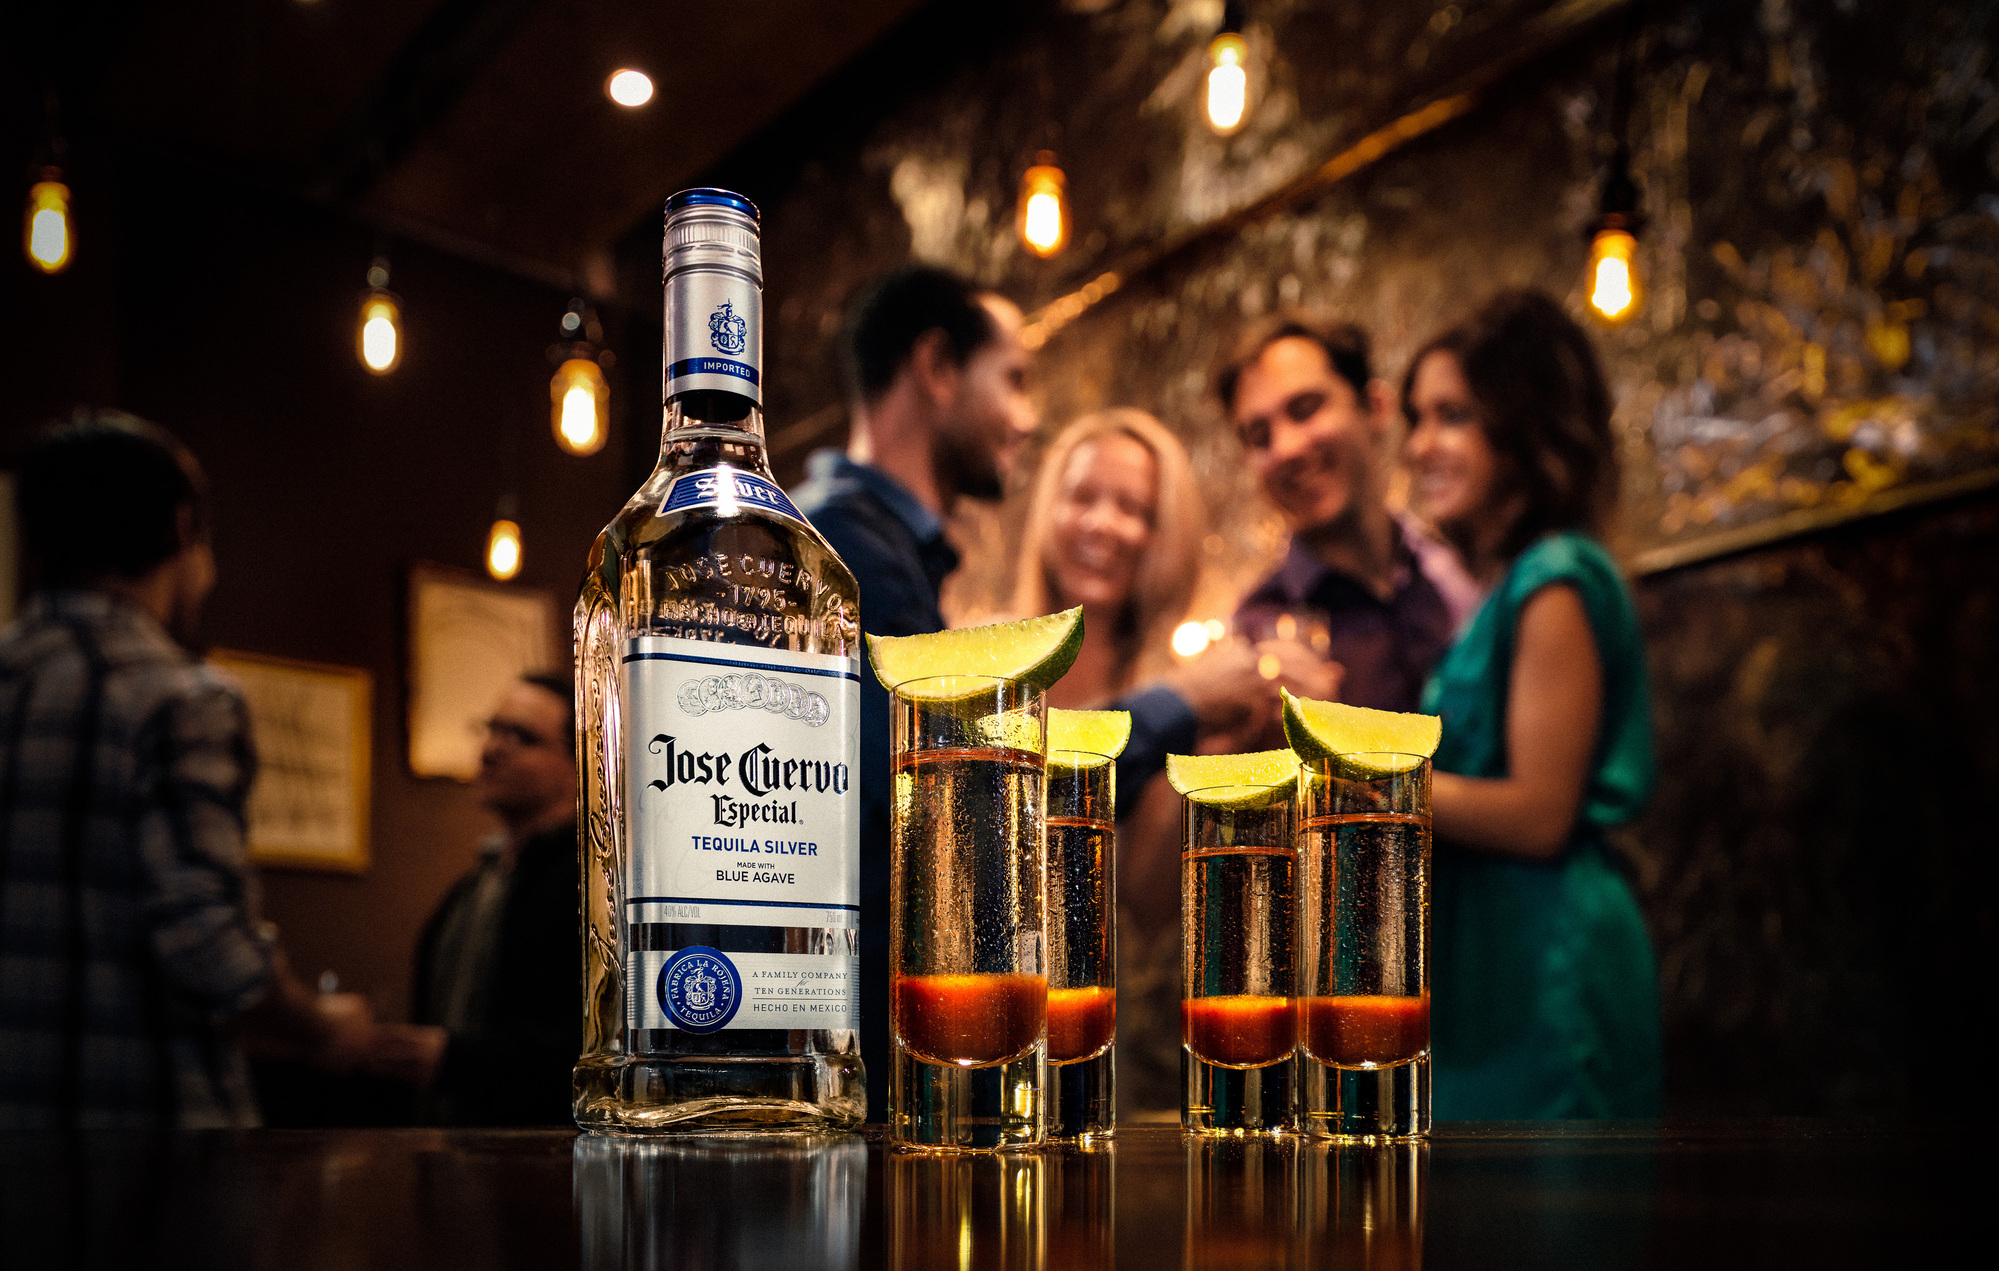 Jose Cuervo tequila bottle and shots by beverage photographer Timothy Hogan. 

Beverages and alcohol product & advertising photography by Timothy Hogan Studio in Los Angeles